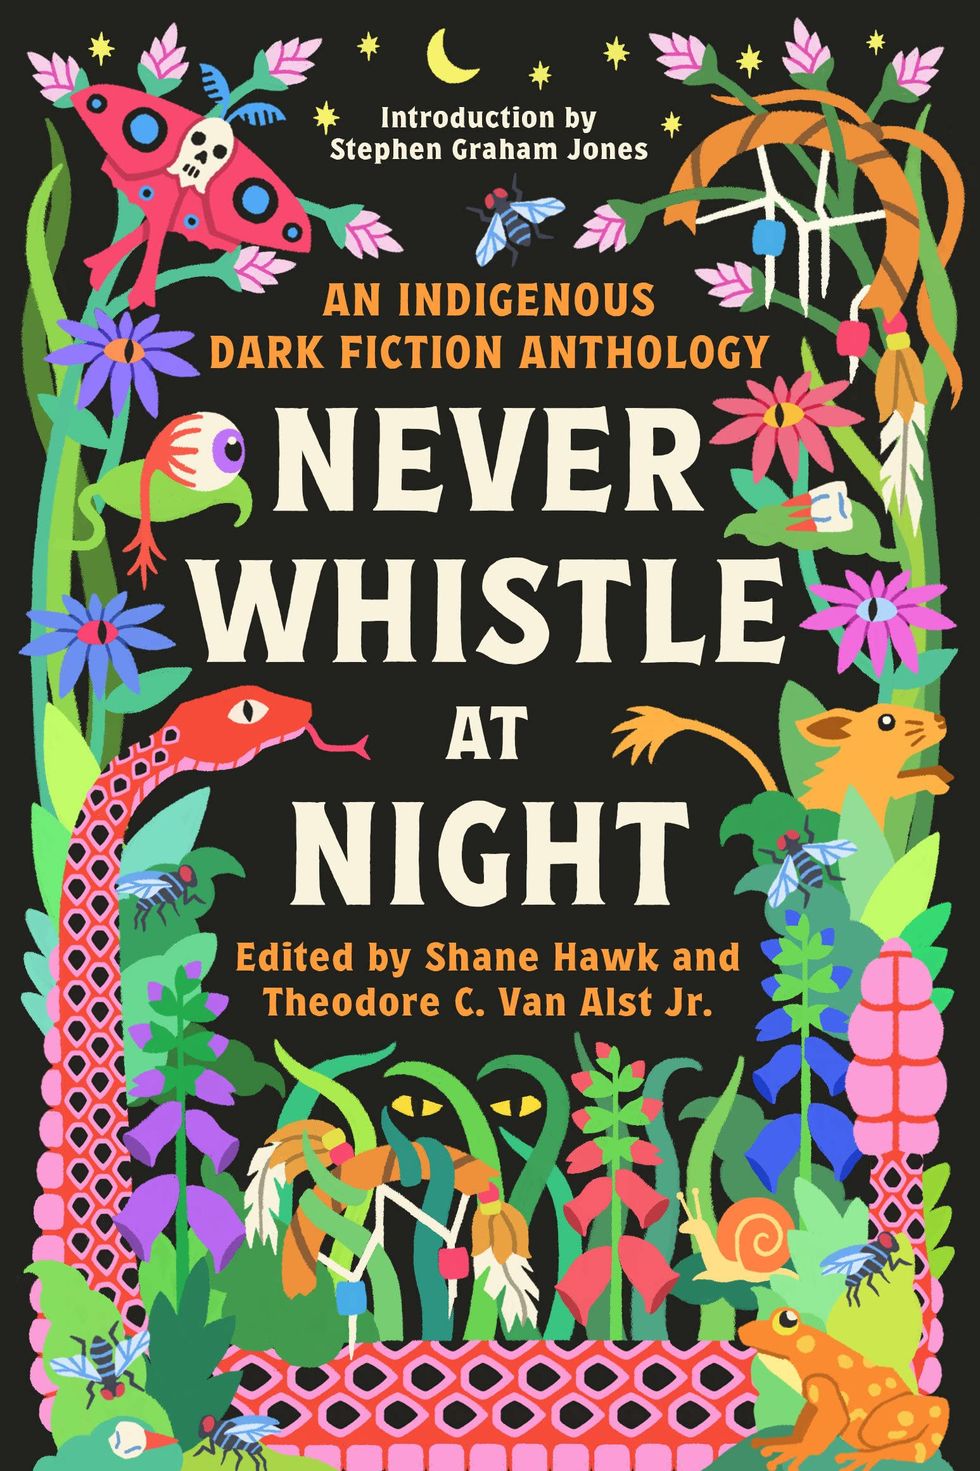 Never Whistle at Night edited by by Shane Hawk and Theodore C. Van Alst Jr. 